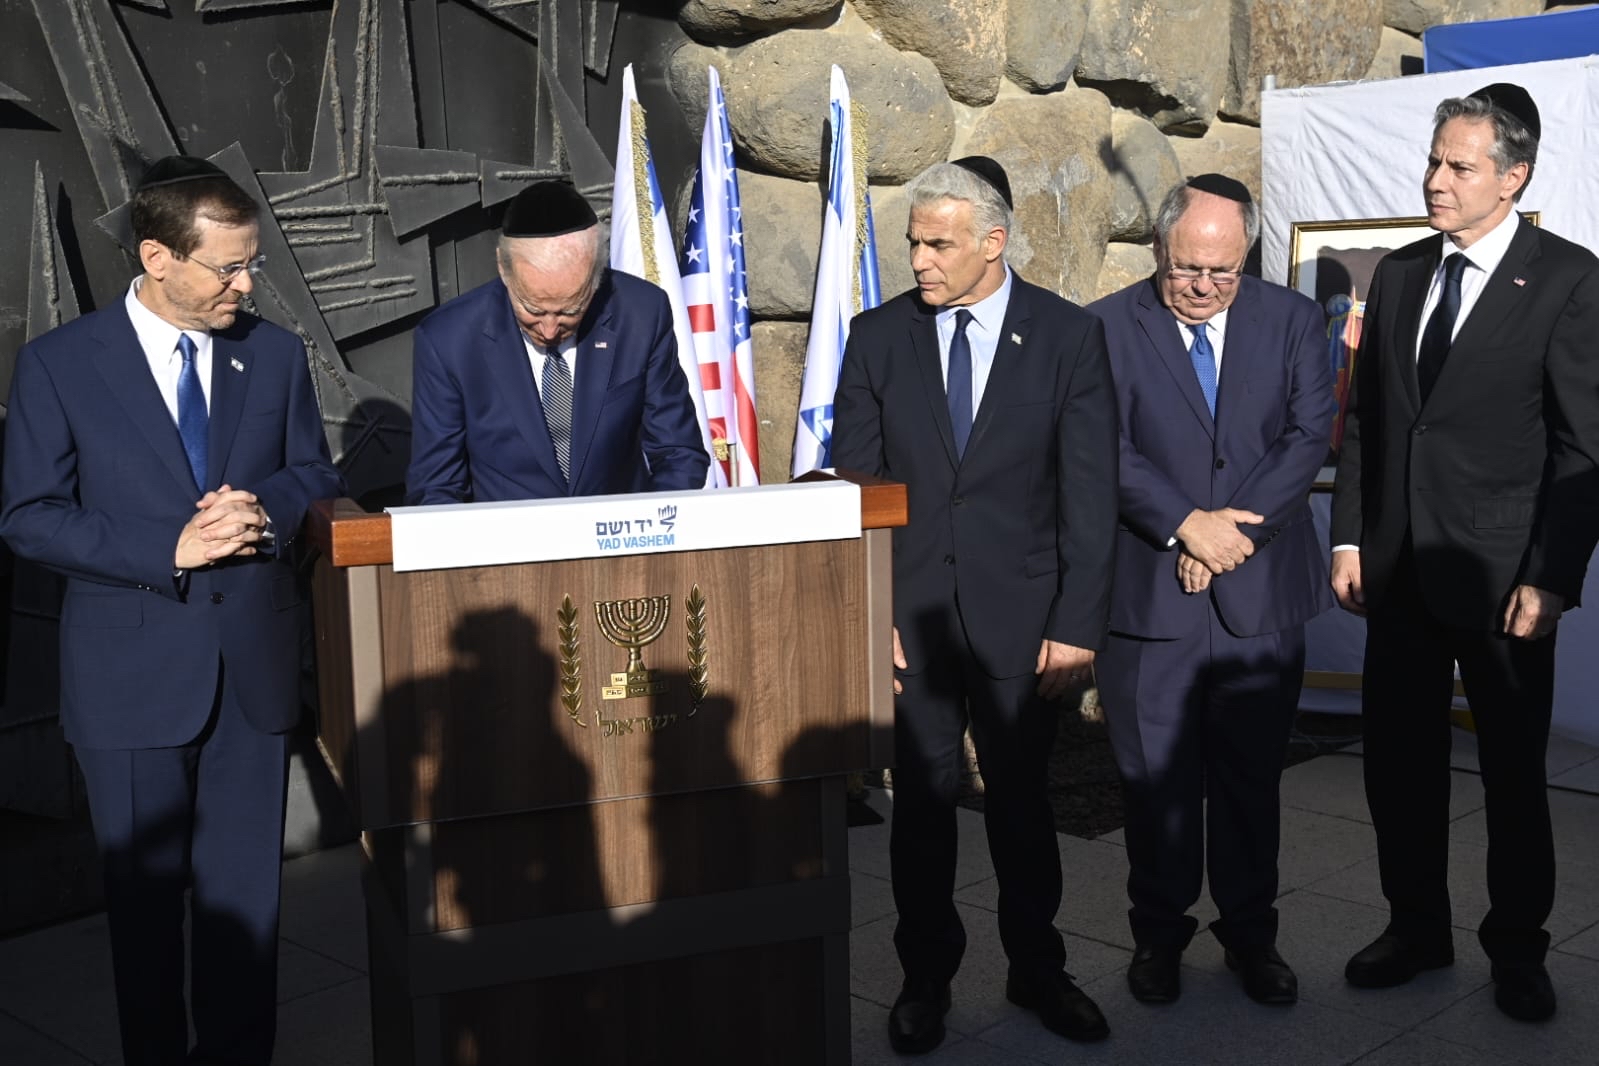 President Joe Biden signed the Yad Vashem Guest Book: "We must teach every successive generation that it can happen again."